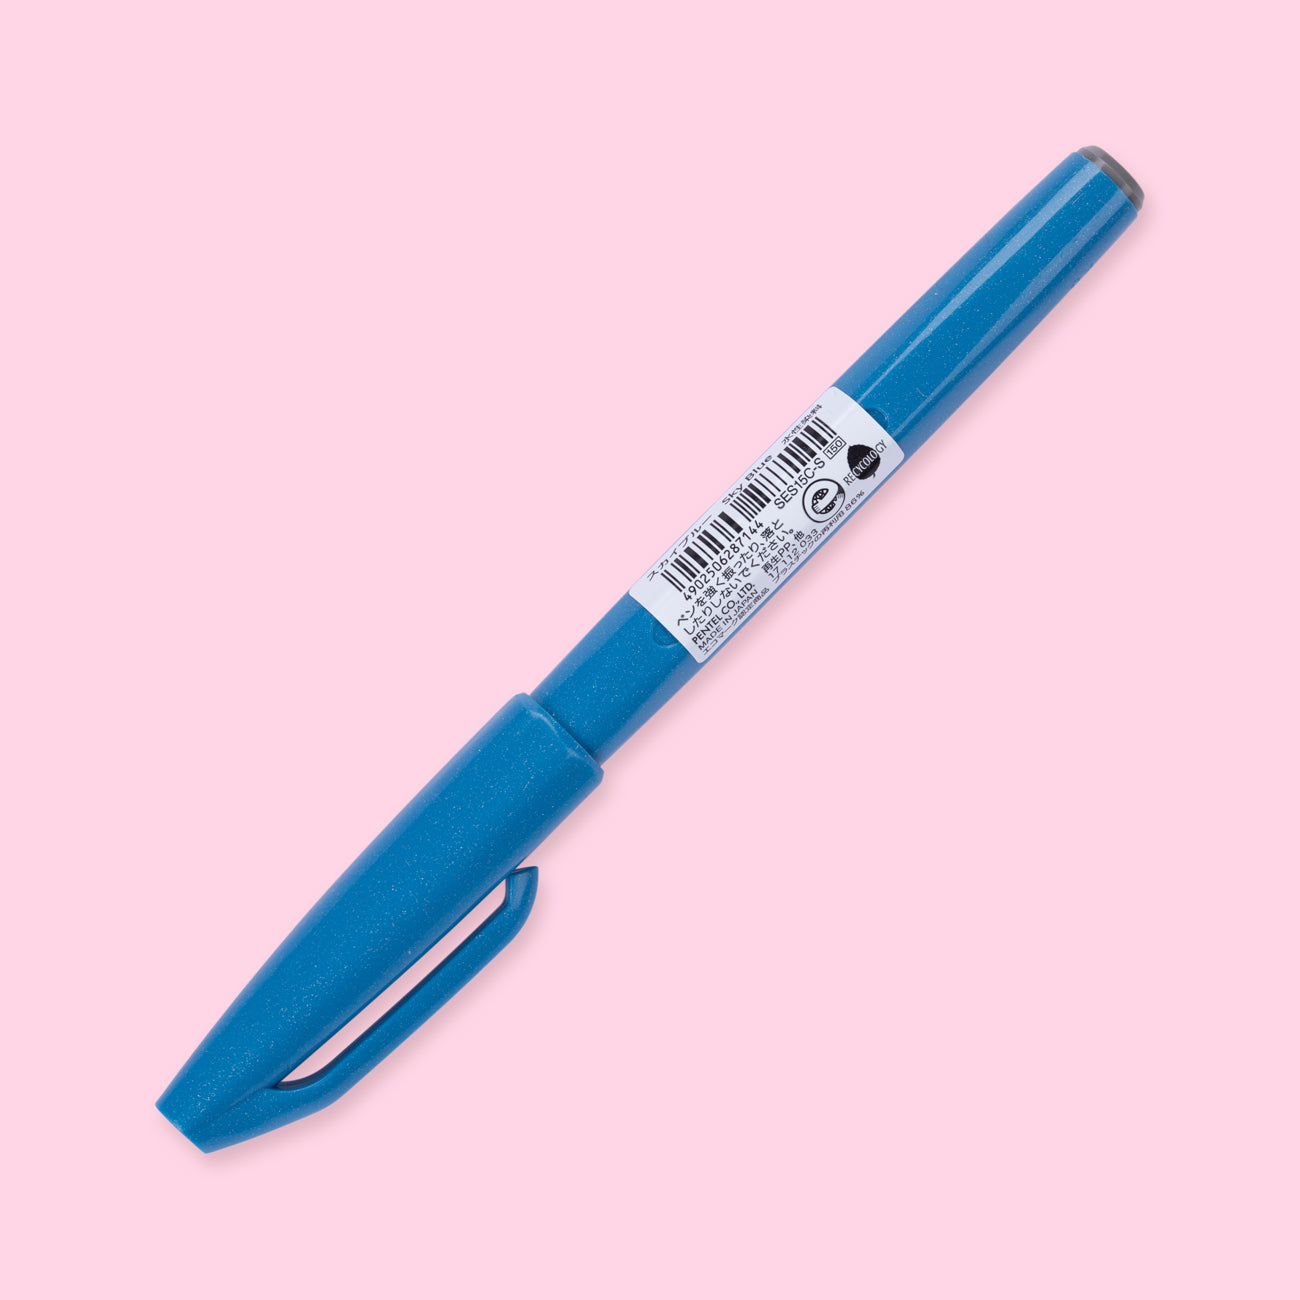 Pentel Fude Touch Brush Sign Pen - Turquoise Green